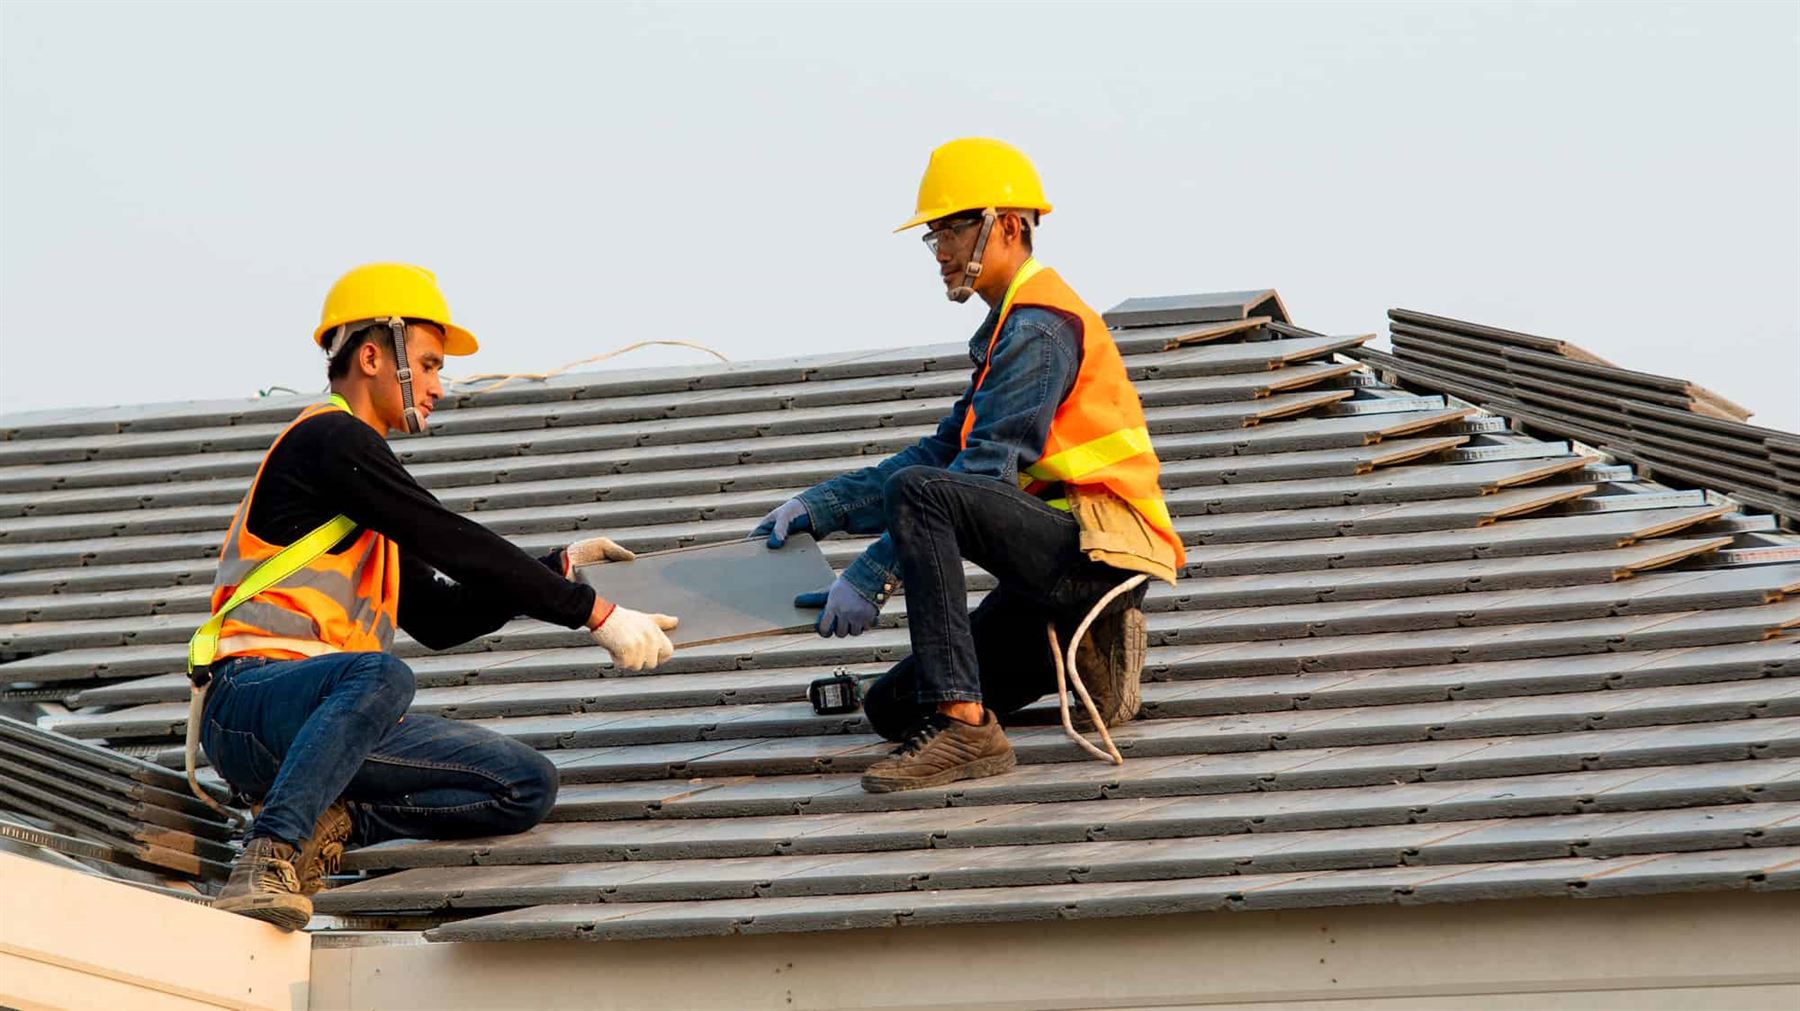 Certified Roofing Specialists